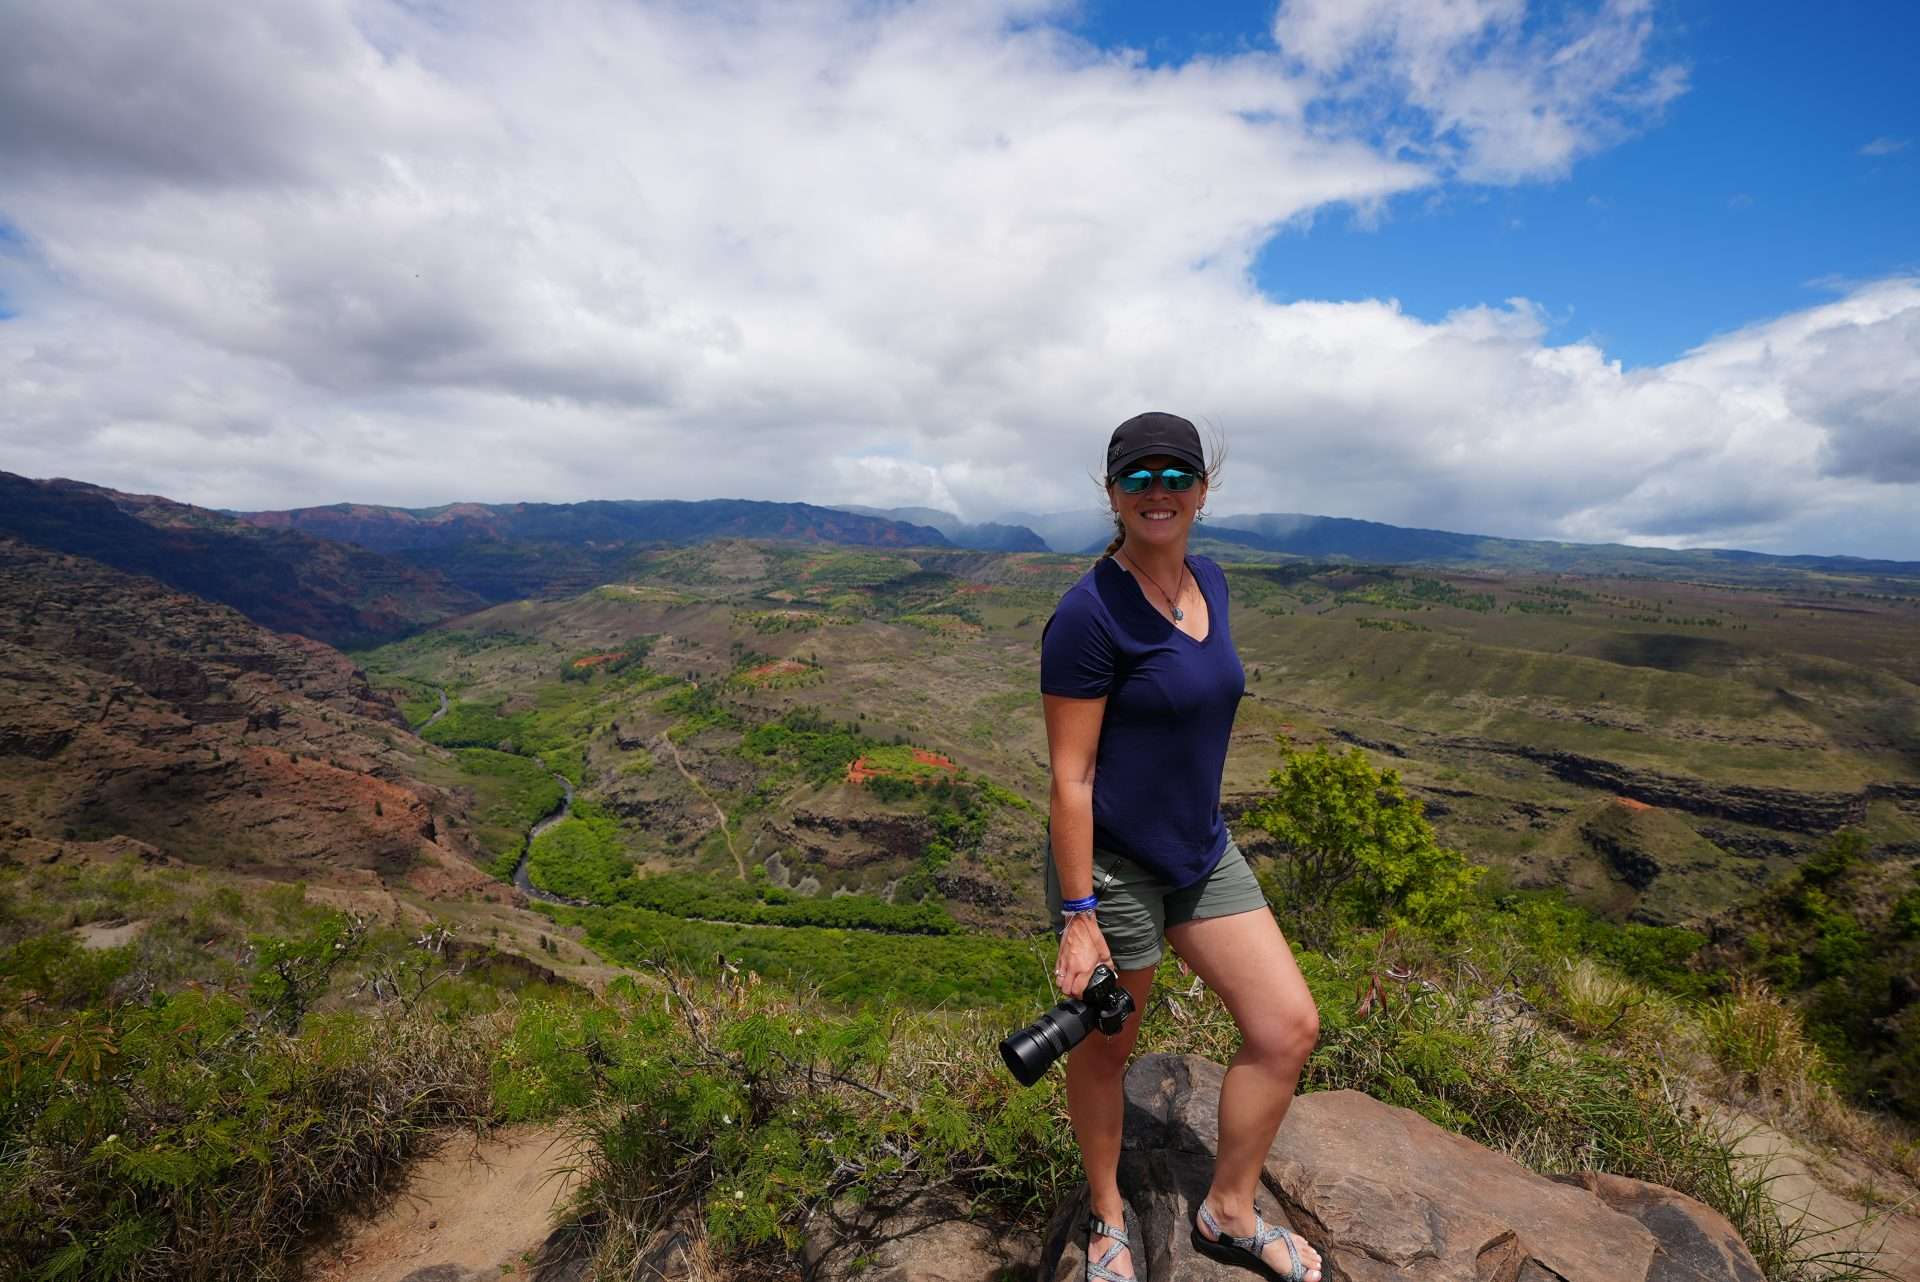 Caitlin from Mortons on the Move in Waimea Canyon